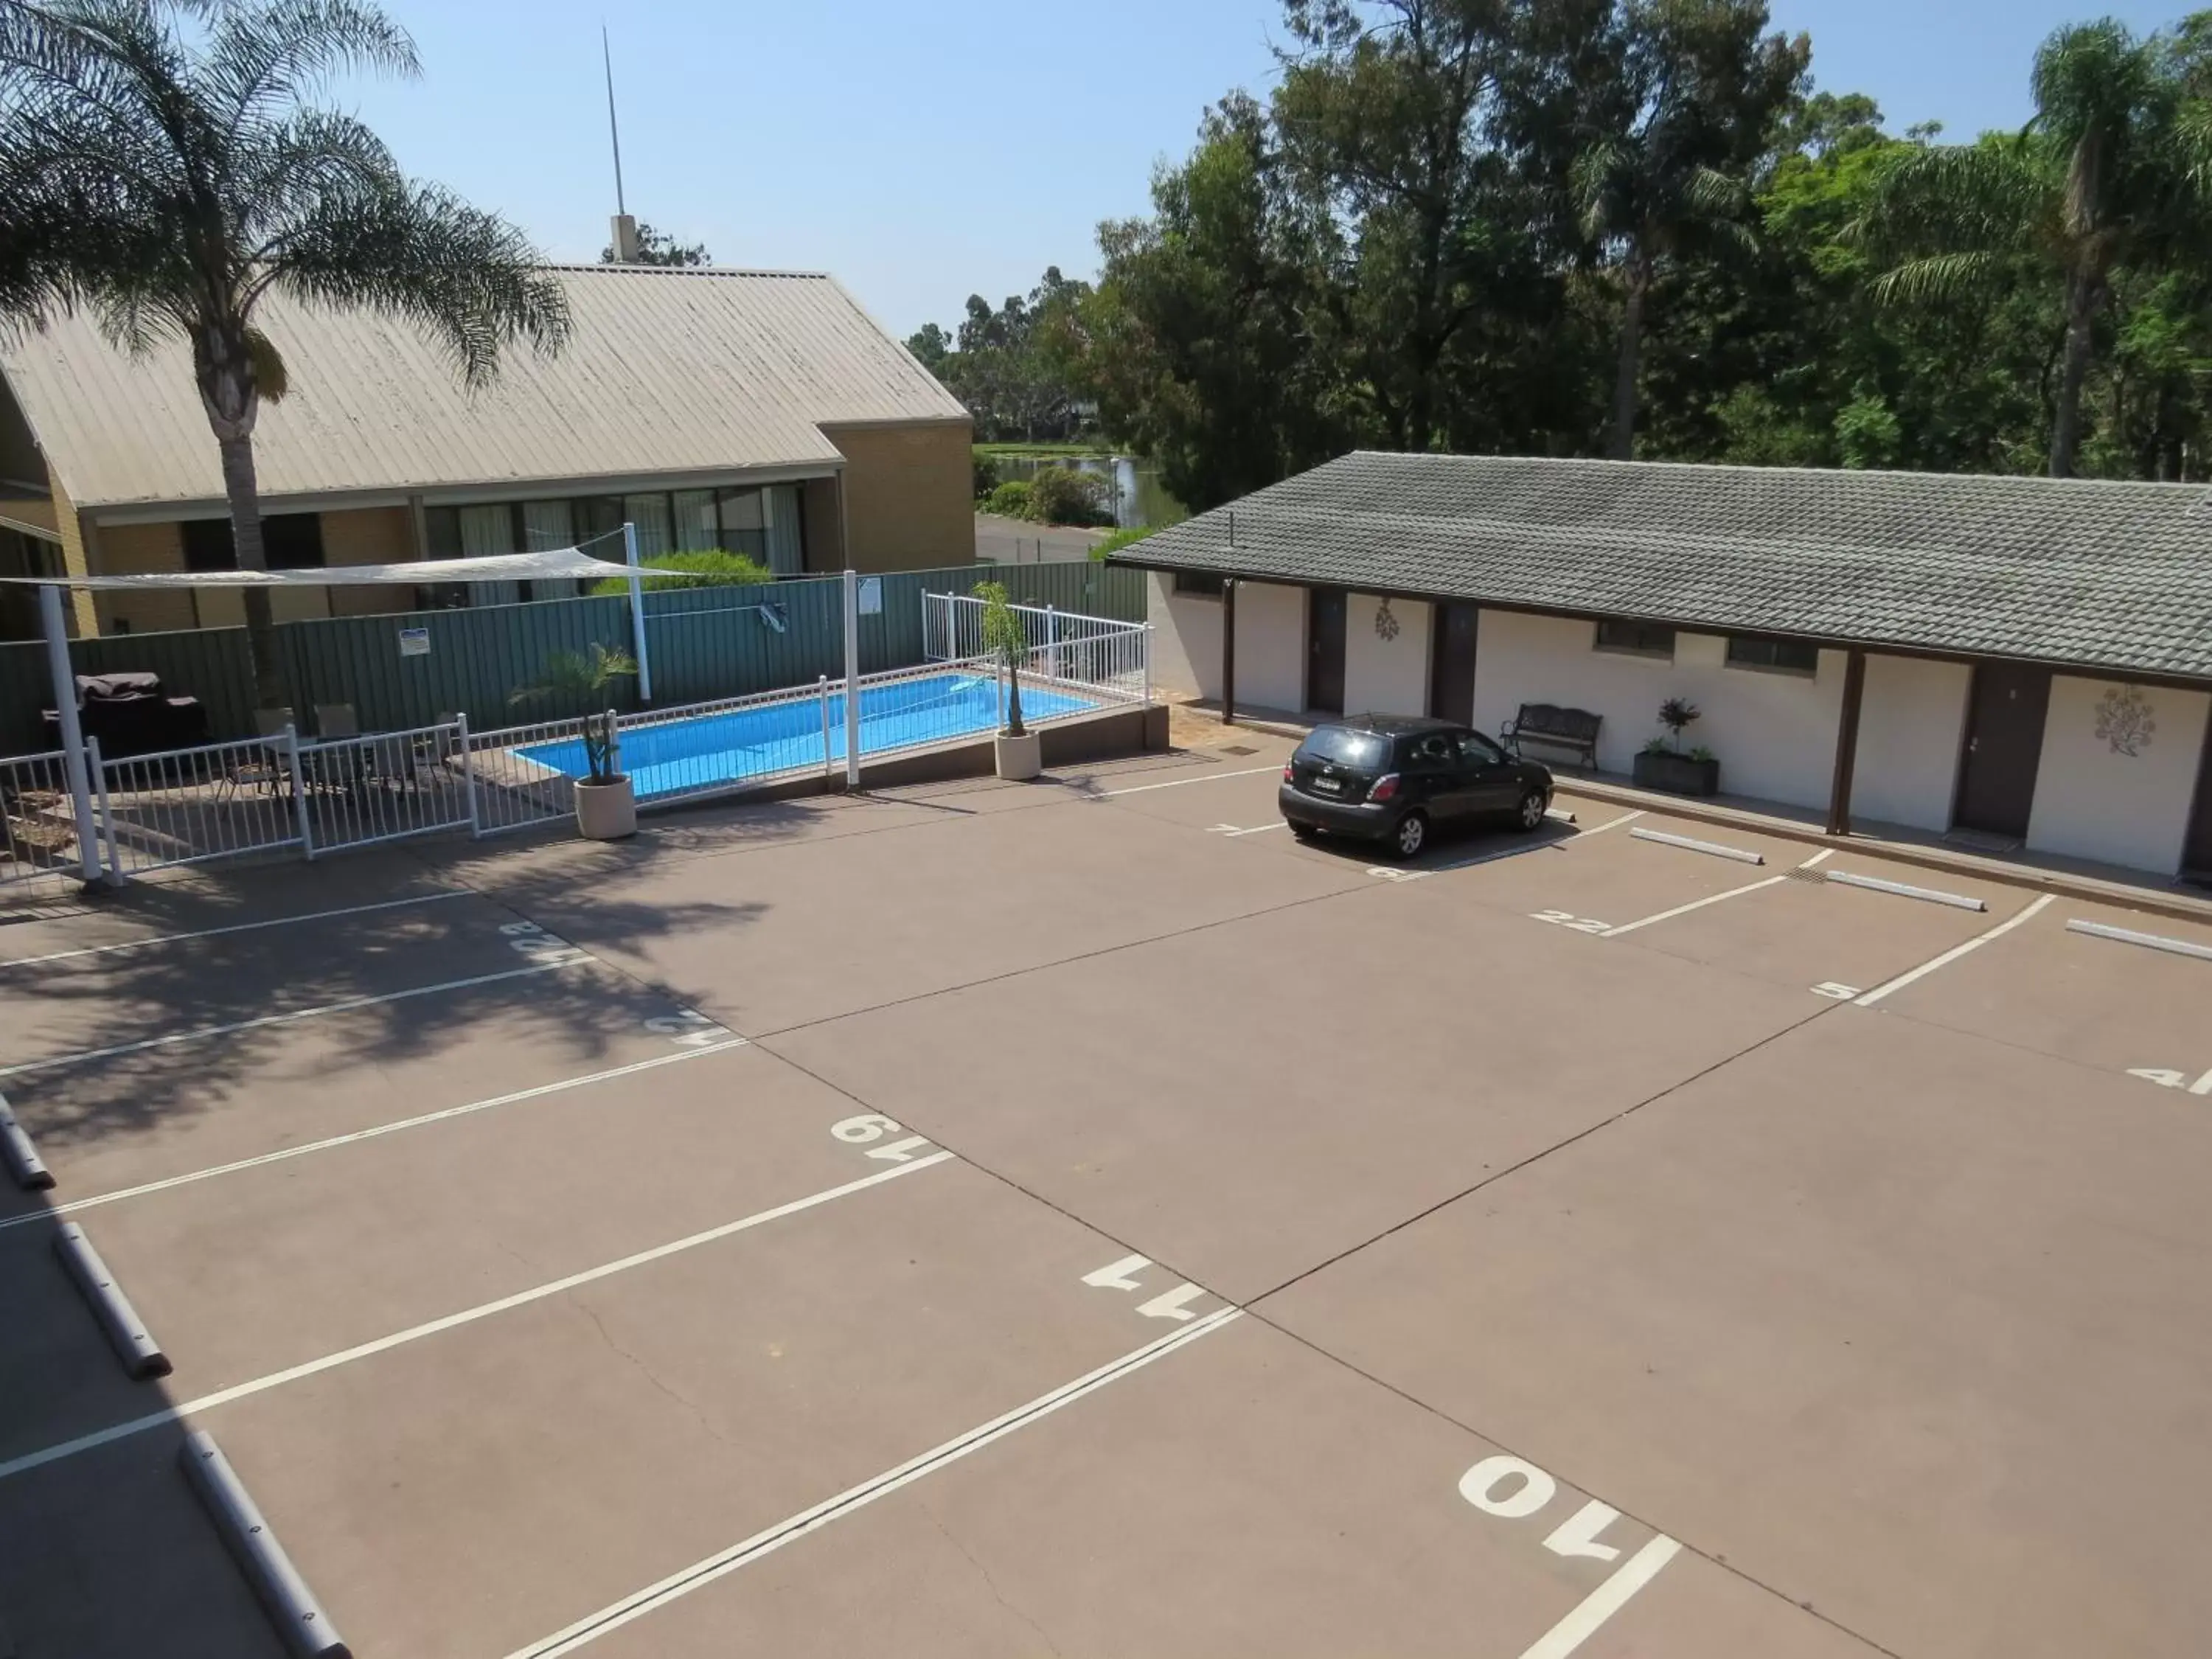 Property building, Swimming Pool in Parkhaven